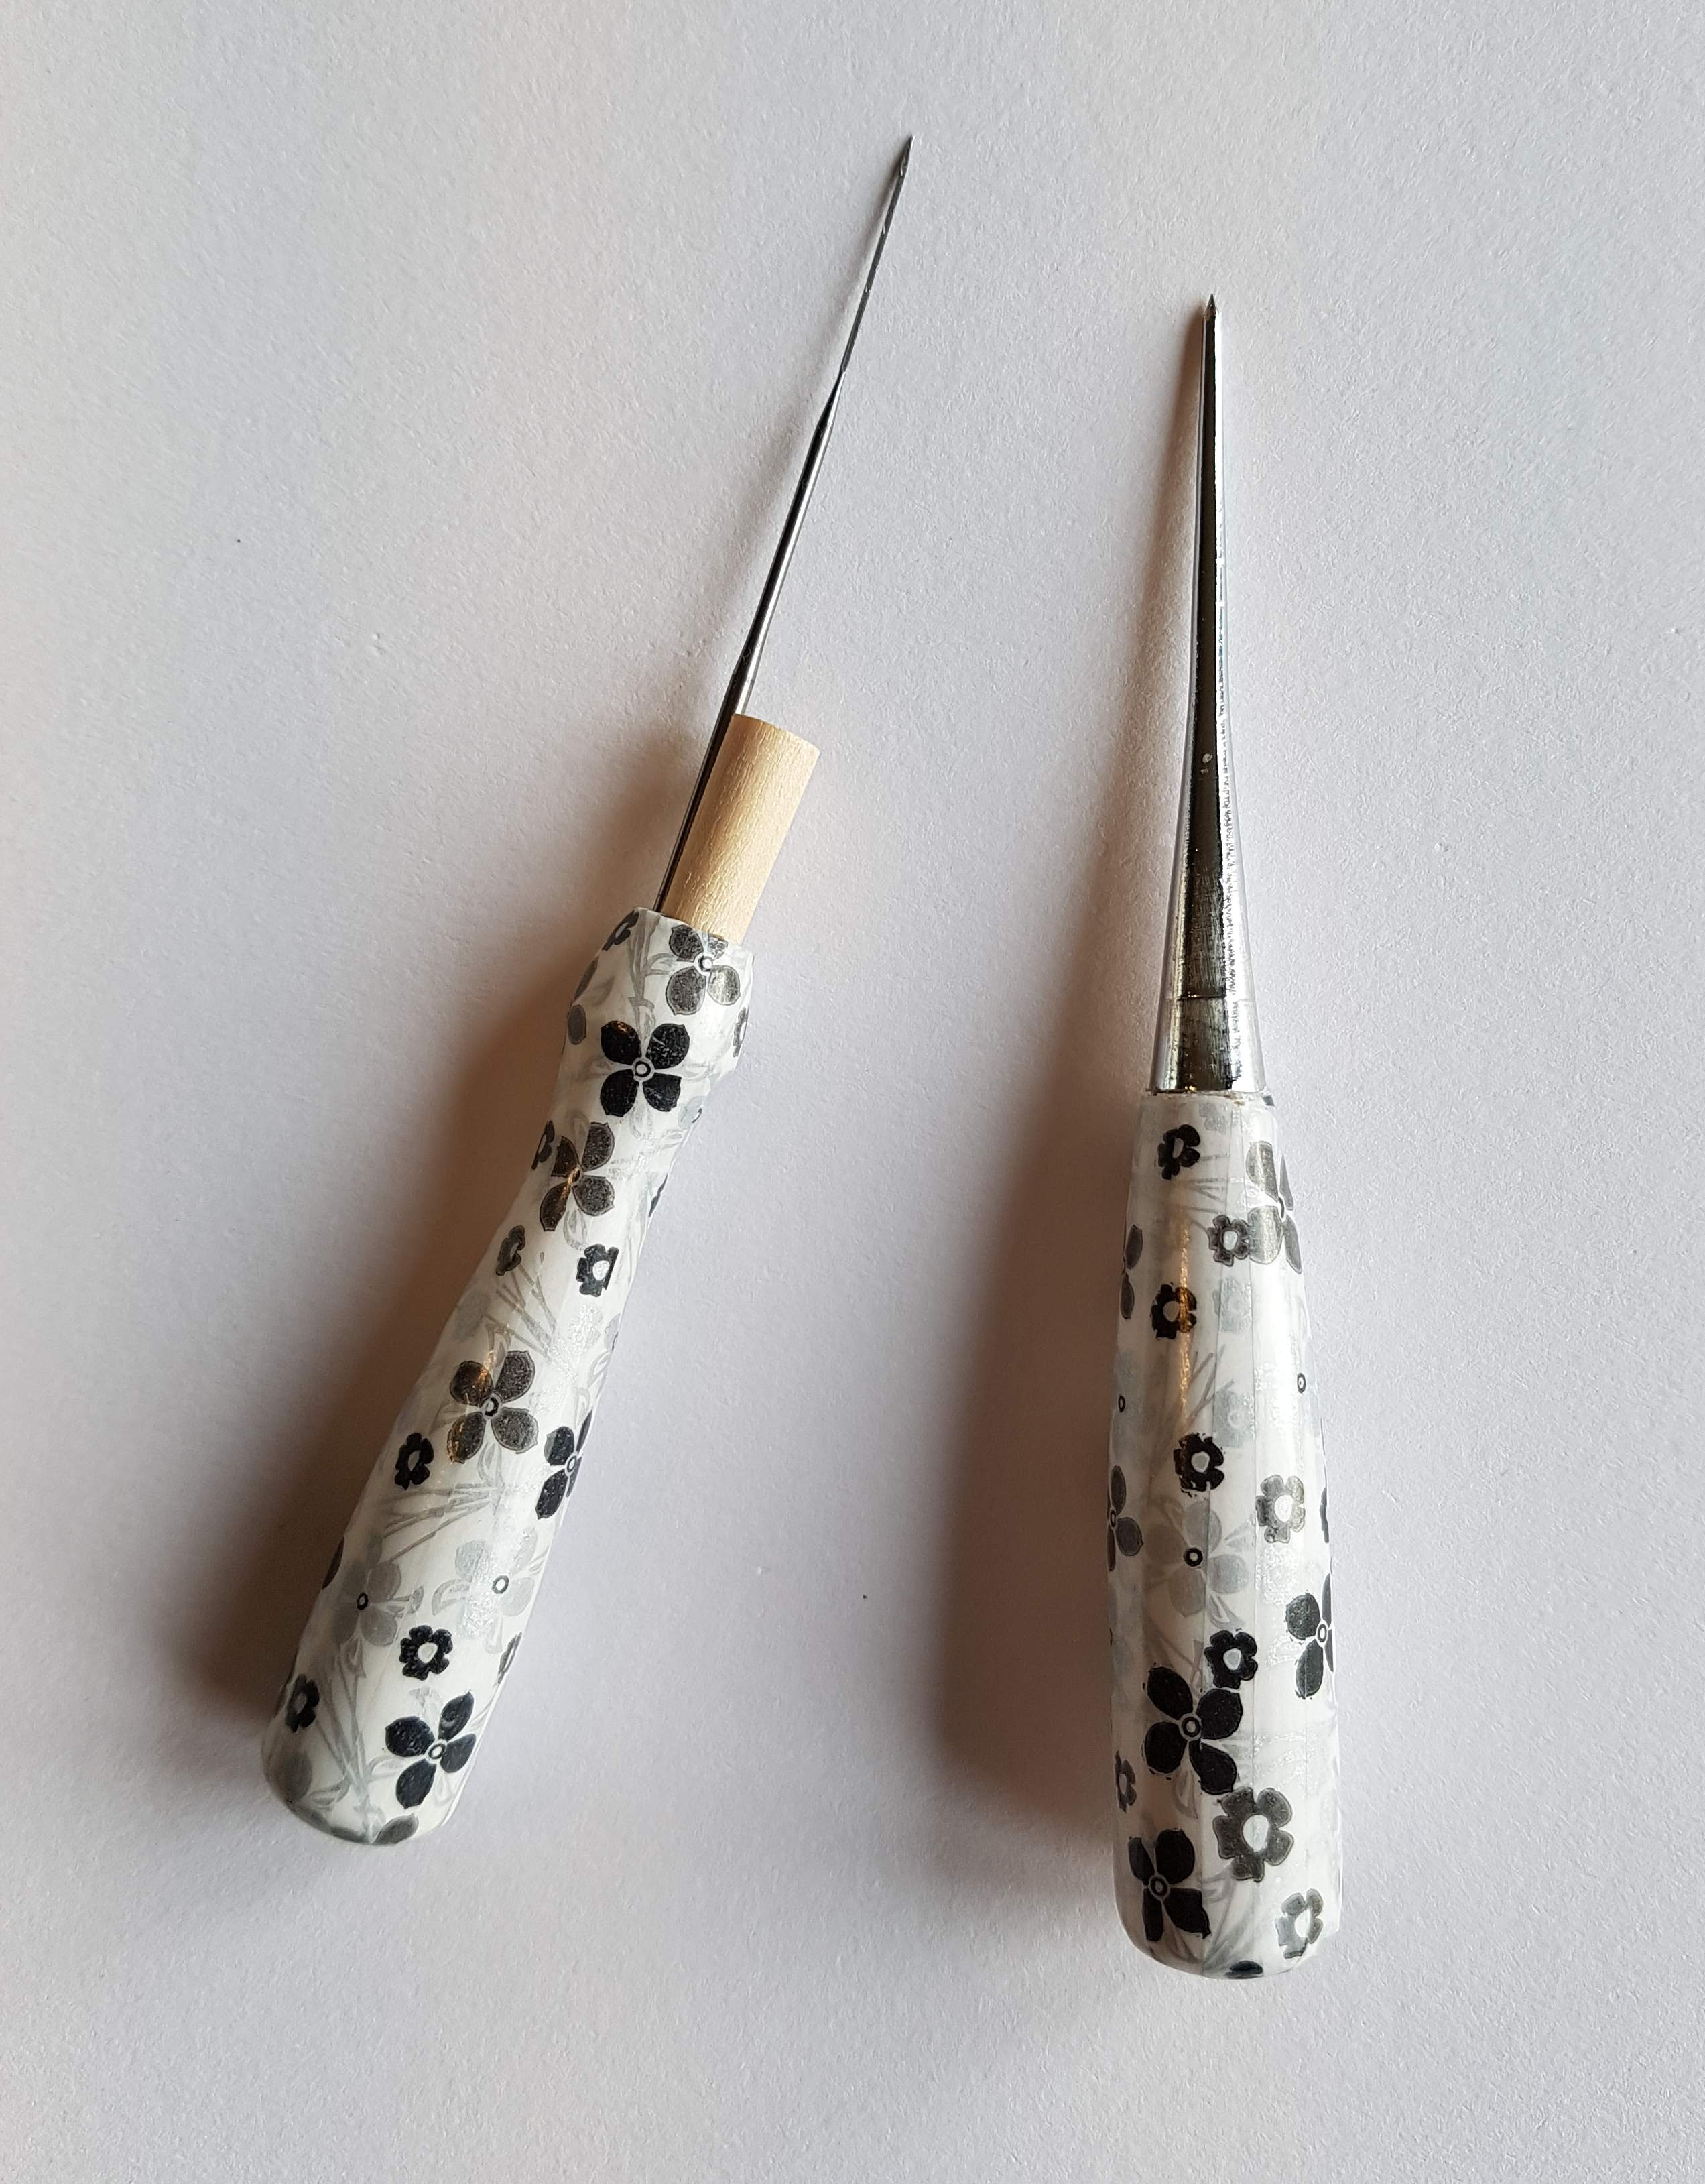 Decorated Felting Tools - Tec White with Flowers